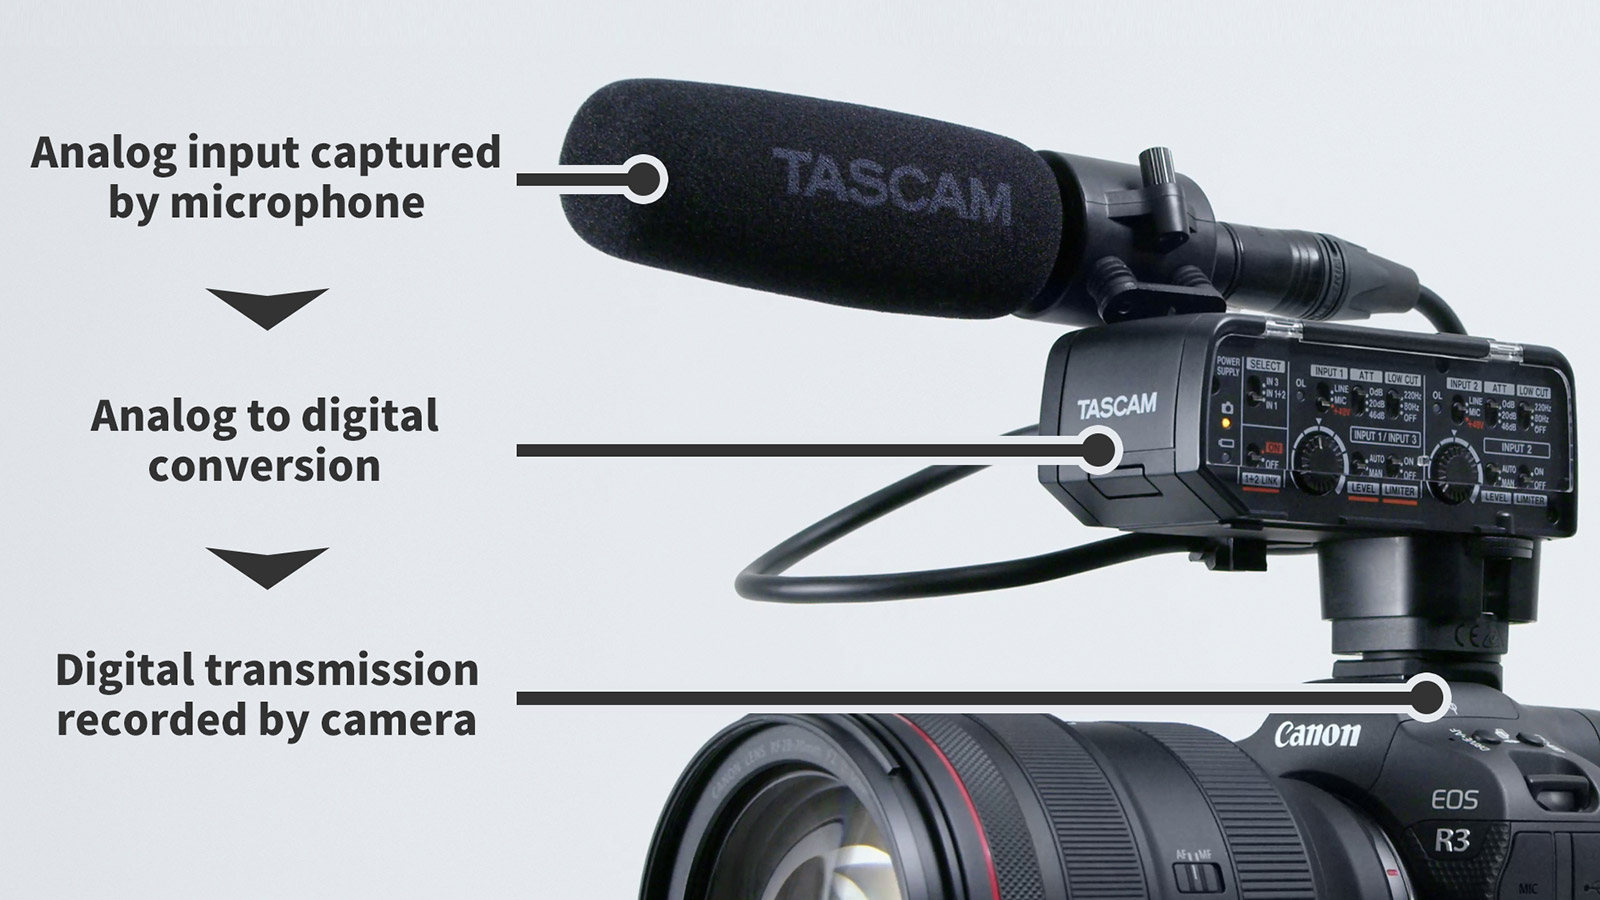 Equipped With a High-performance AD Converter, Direct Transmission of Digital Audio to the Camera